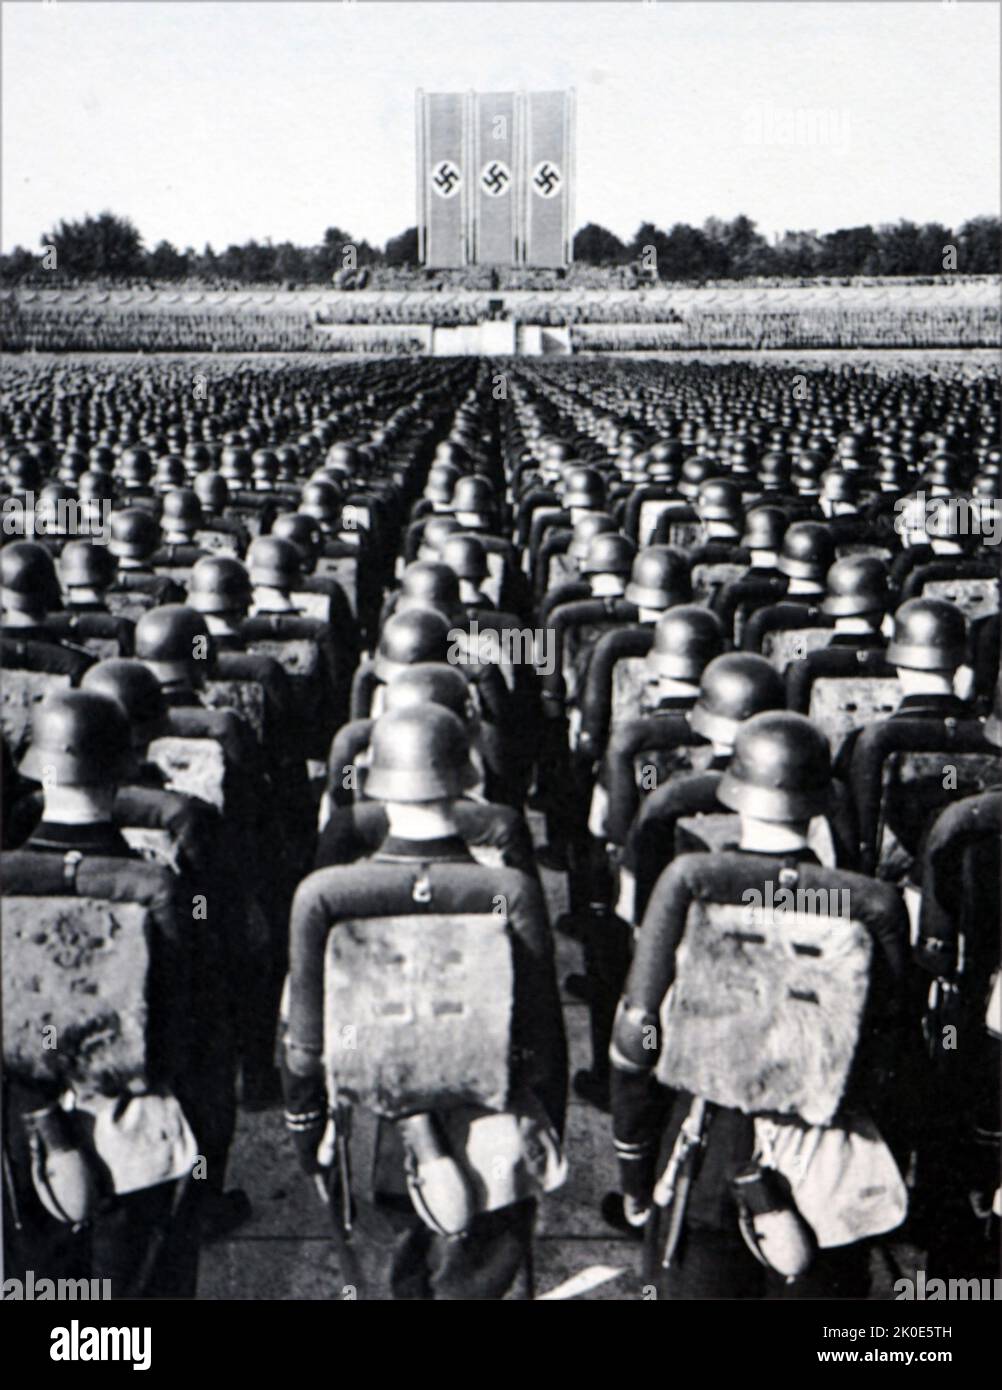 The Nuremberg Rally was the annual rally of the Nazi Party in Germany, held from 1923 to 1938. They were large Nazi propaganda events, especially after Adolf Hitler's rise to power in 1933. These events were held at the Nazi party rally grounds in Nuremberg from 1933 to 1938. Stock Photo